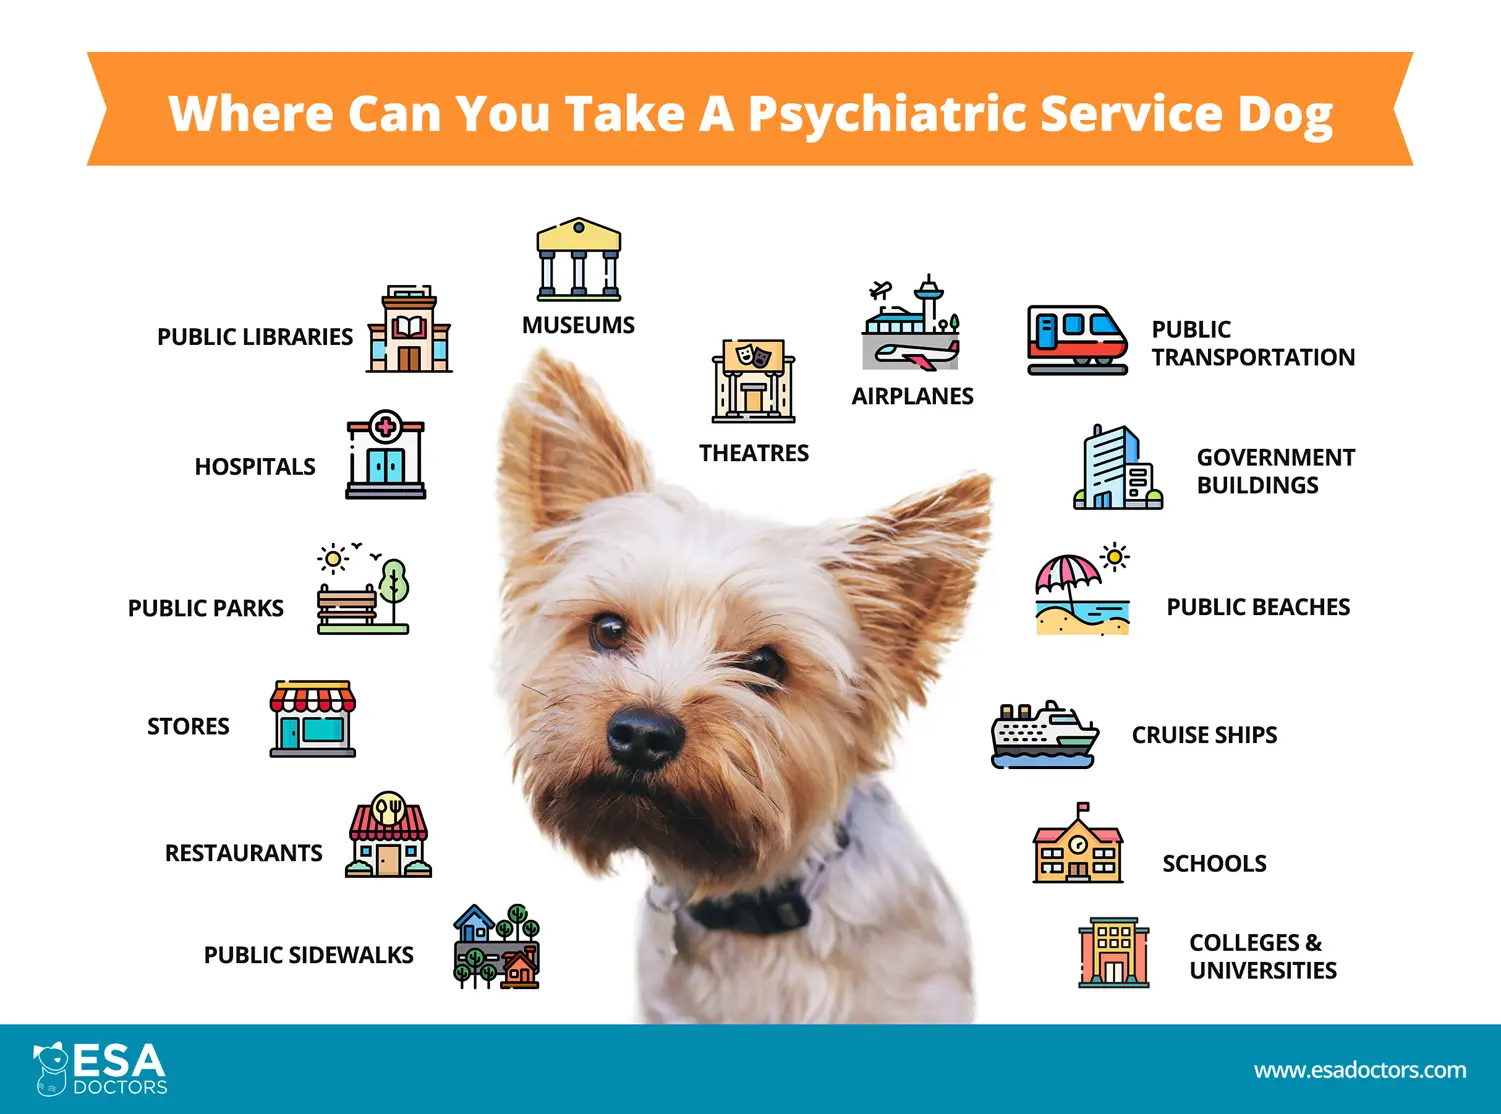 Where Can You Take a Psychiatric Service Dog - Infographic - ESA Doctors